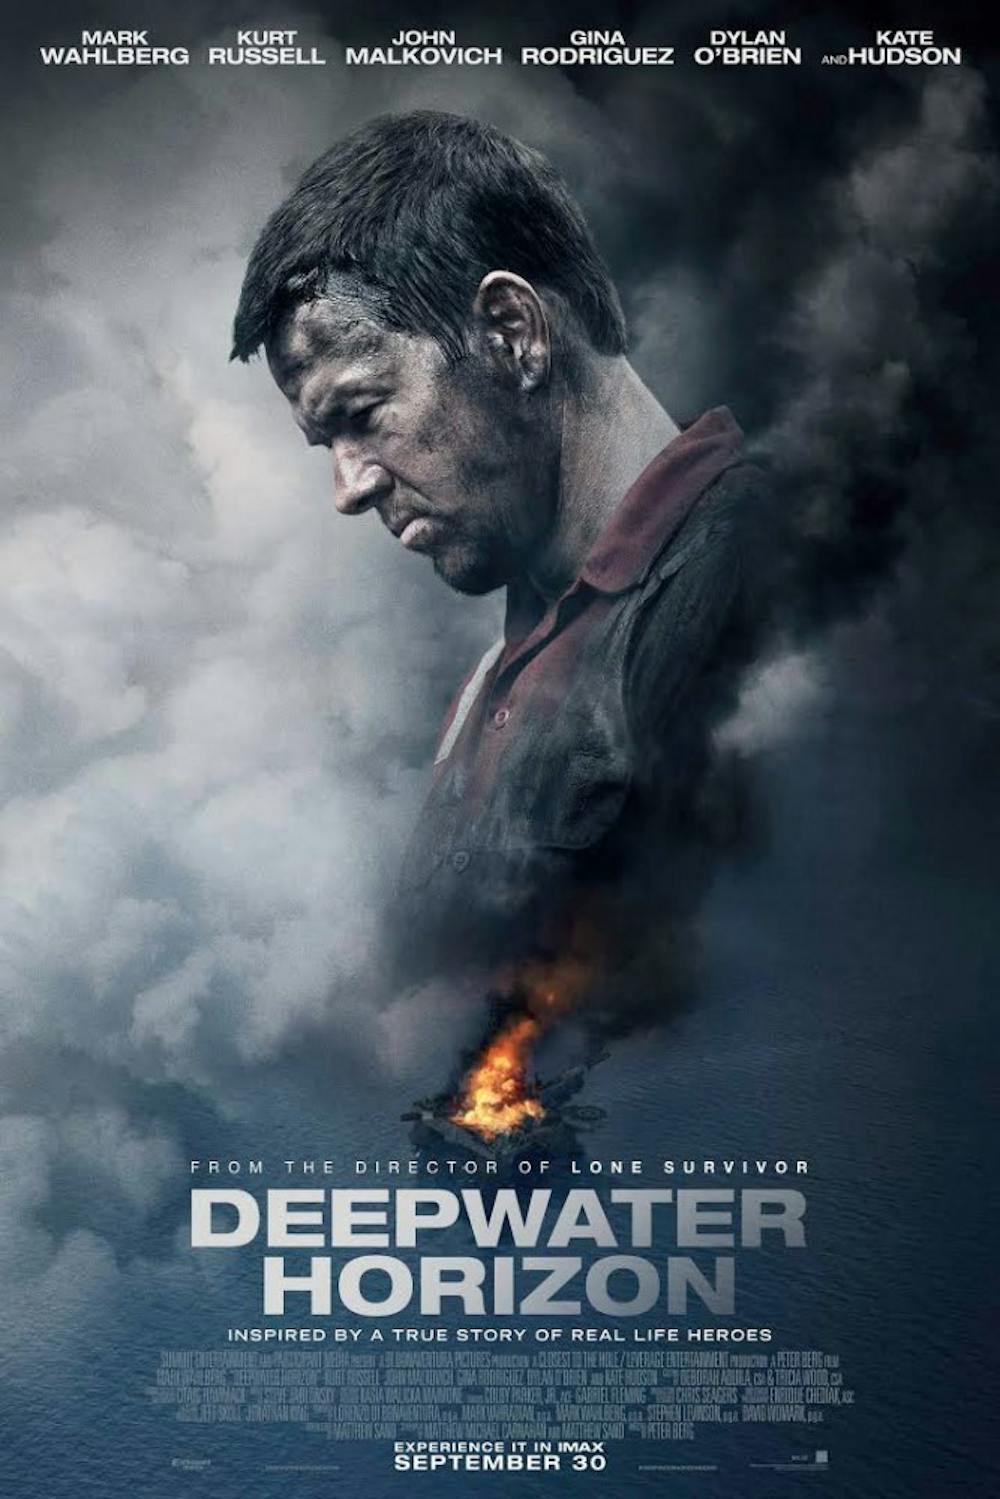 Movie Review: "Deepwater Horizon" overflows with action but lacks thematic depth